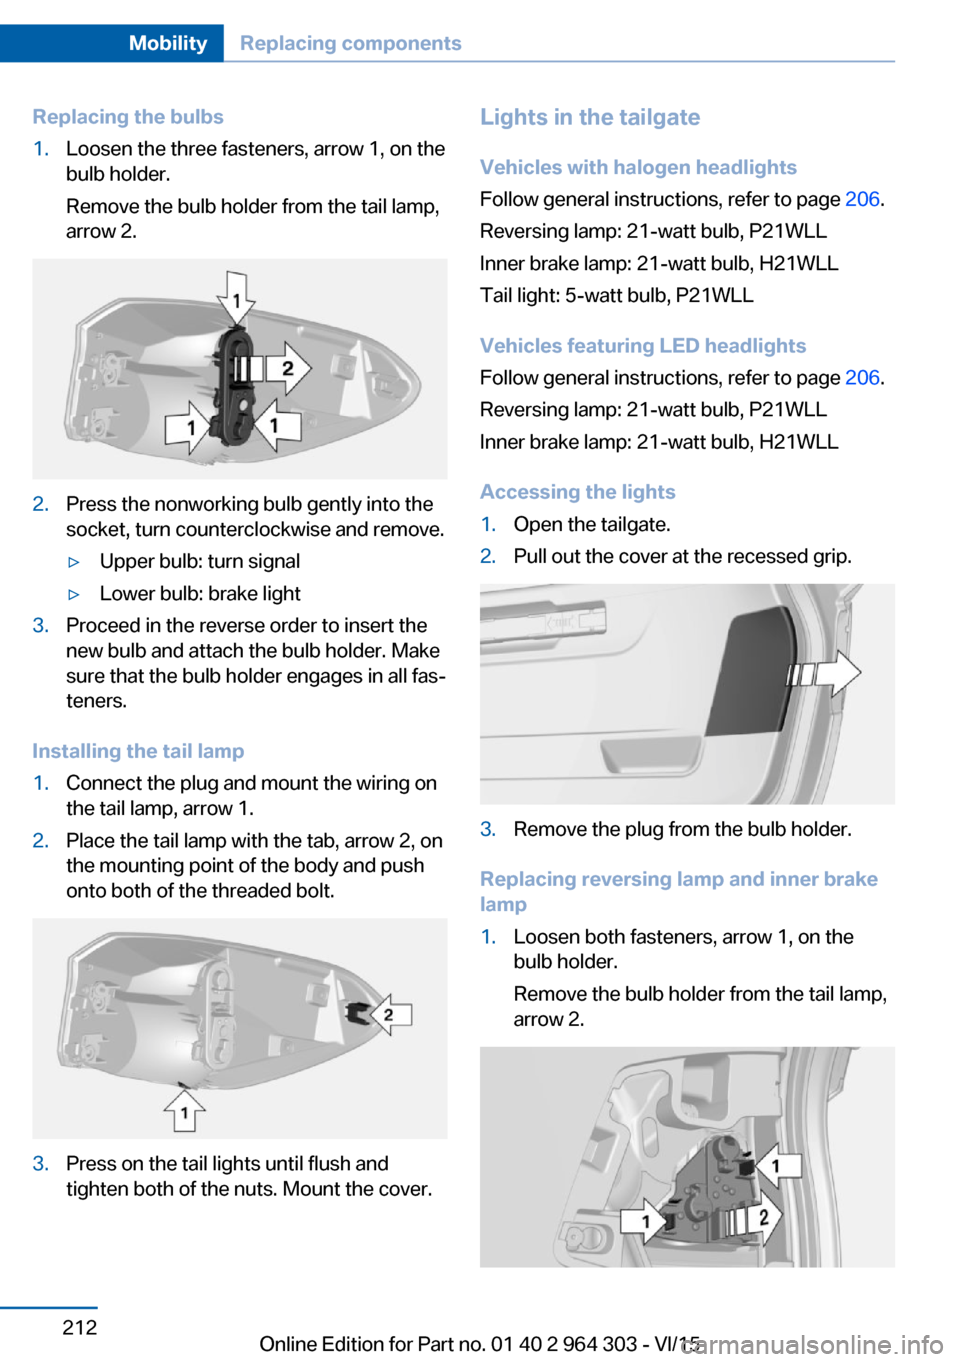 BMW X1 2016 F48 User Guide Replacing the bulbs1.Loosen the three fasteners, arrow 1, on the
bulb holder.
Remove the bulb holder from the tail lamp,
arrow 2.2.Press the nonworking bulb gently into the
socket, turn counterclockwi